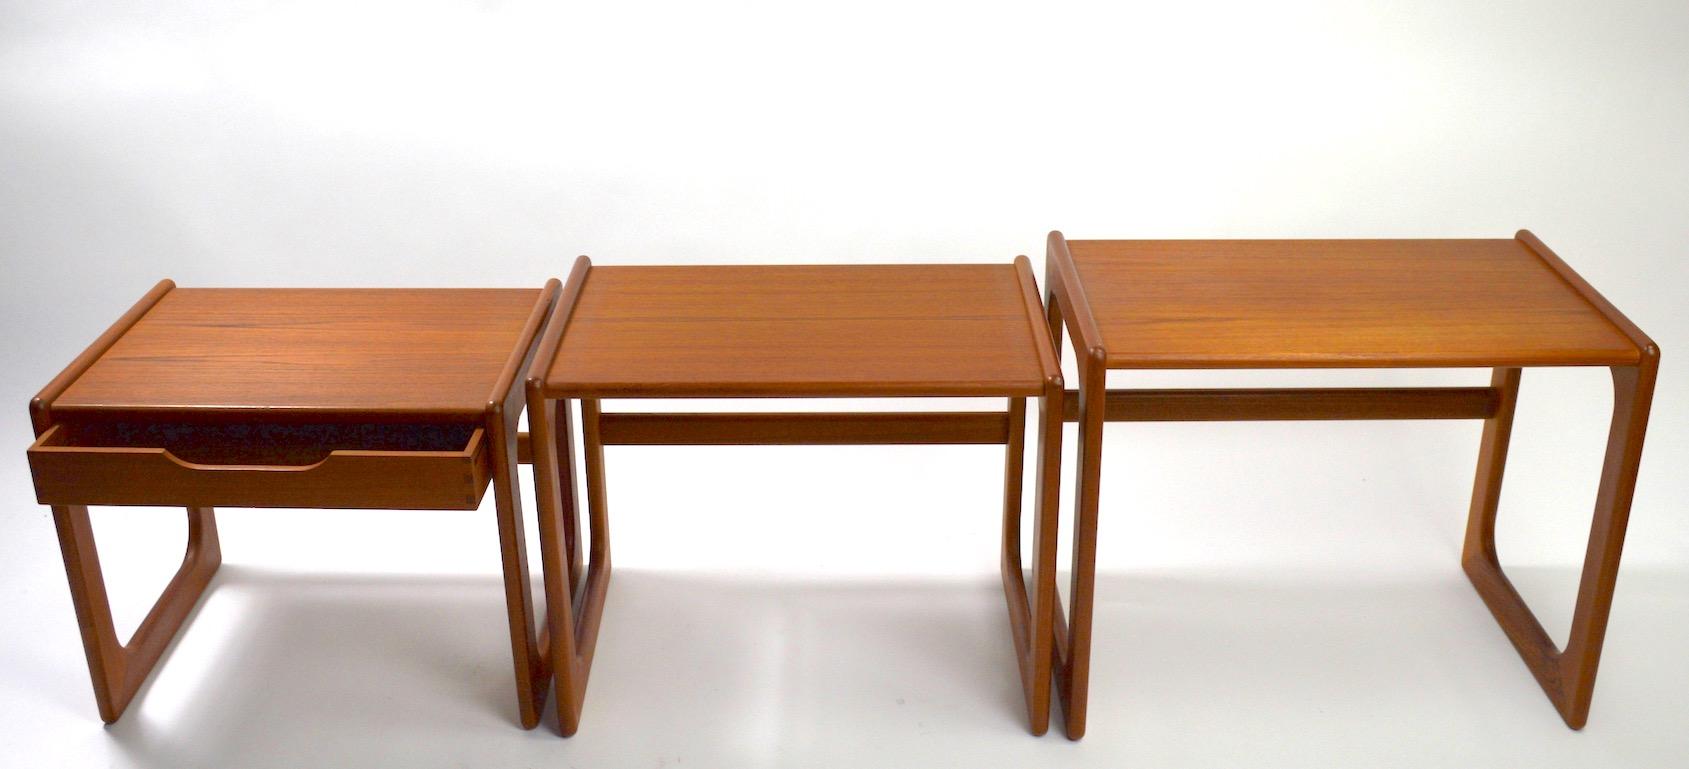 Nice set of three graduated nesting tables made in Denmark. Original, clean, ready to use condition, the smallest table has a drawer, unusual form, not often seen in these sets. Manufacture attributed to Dyrlund, however it is unsigned. Dimensions